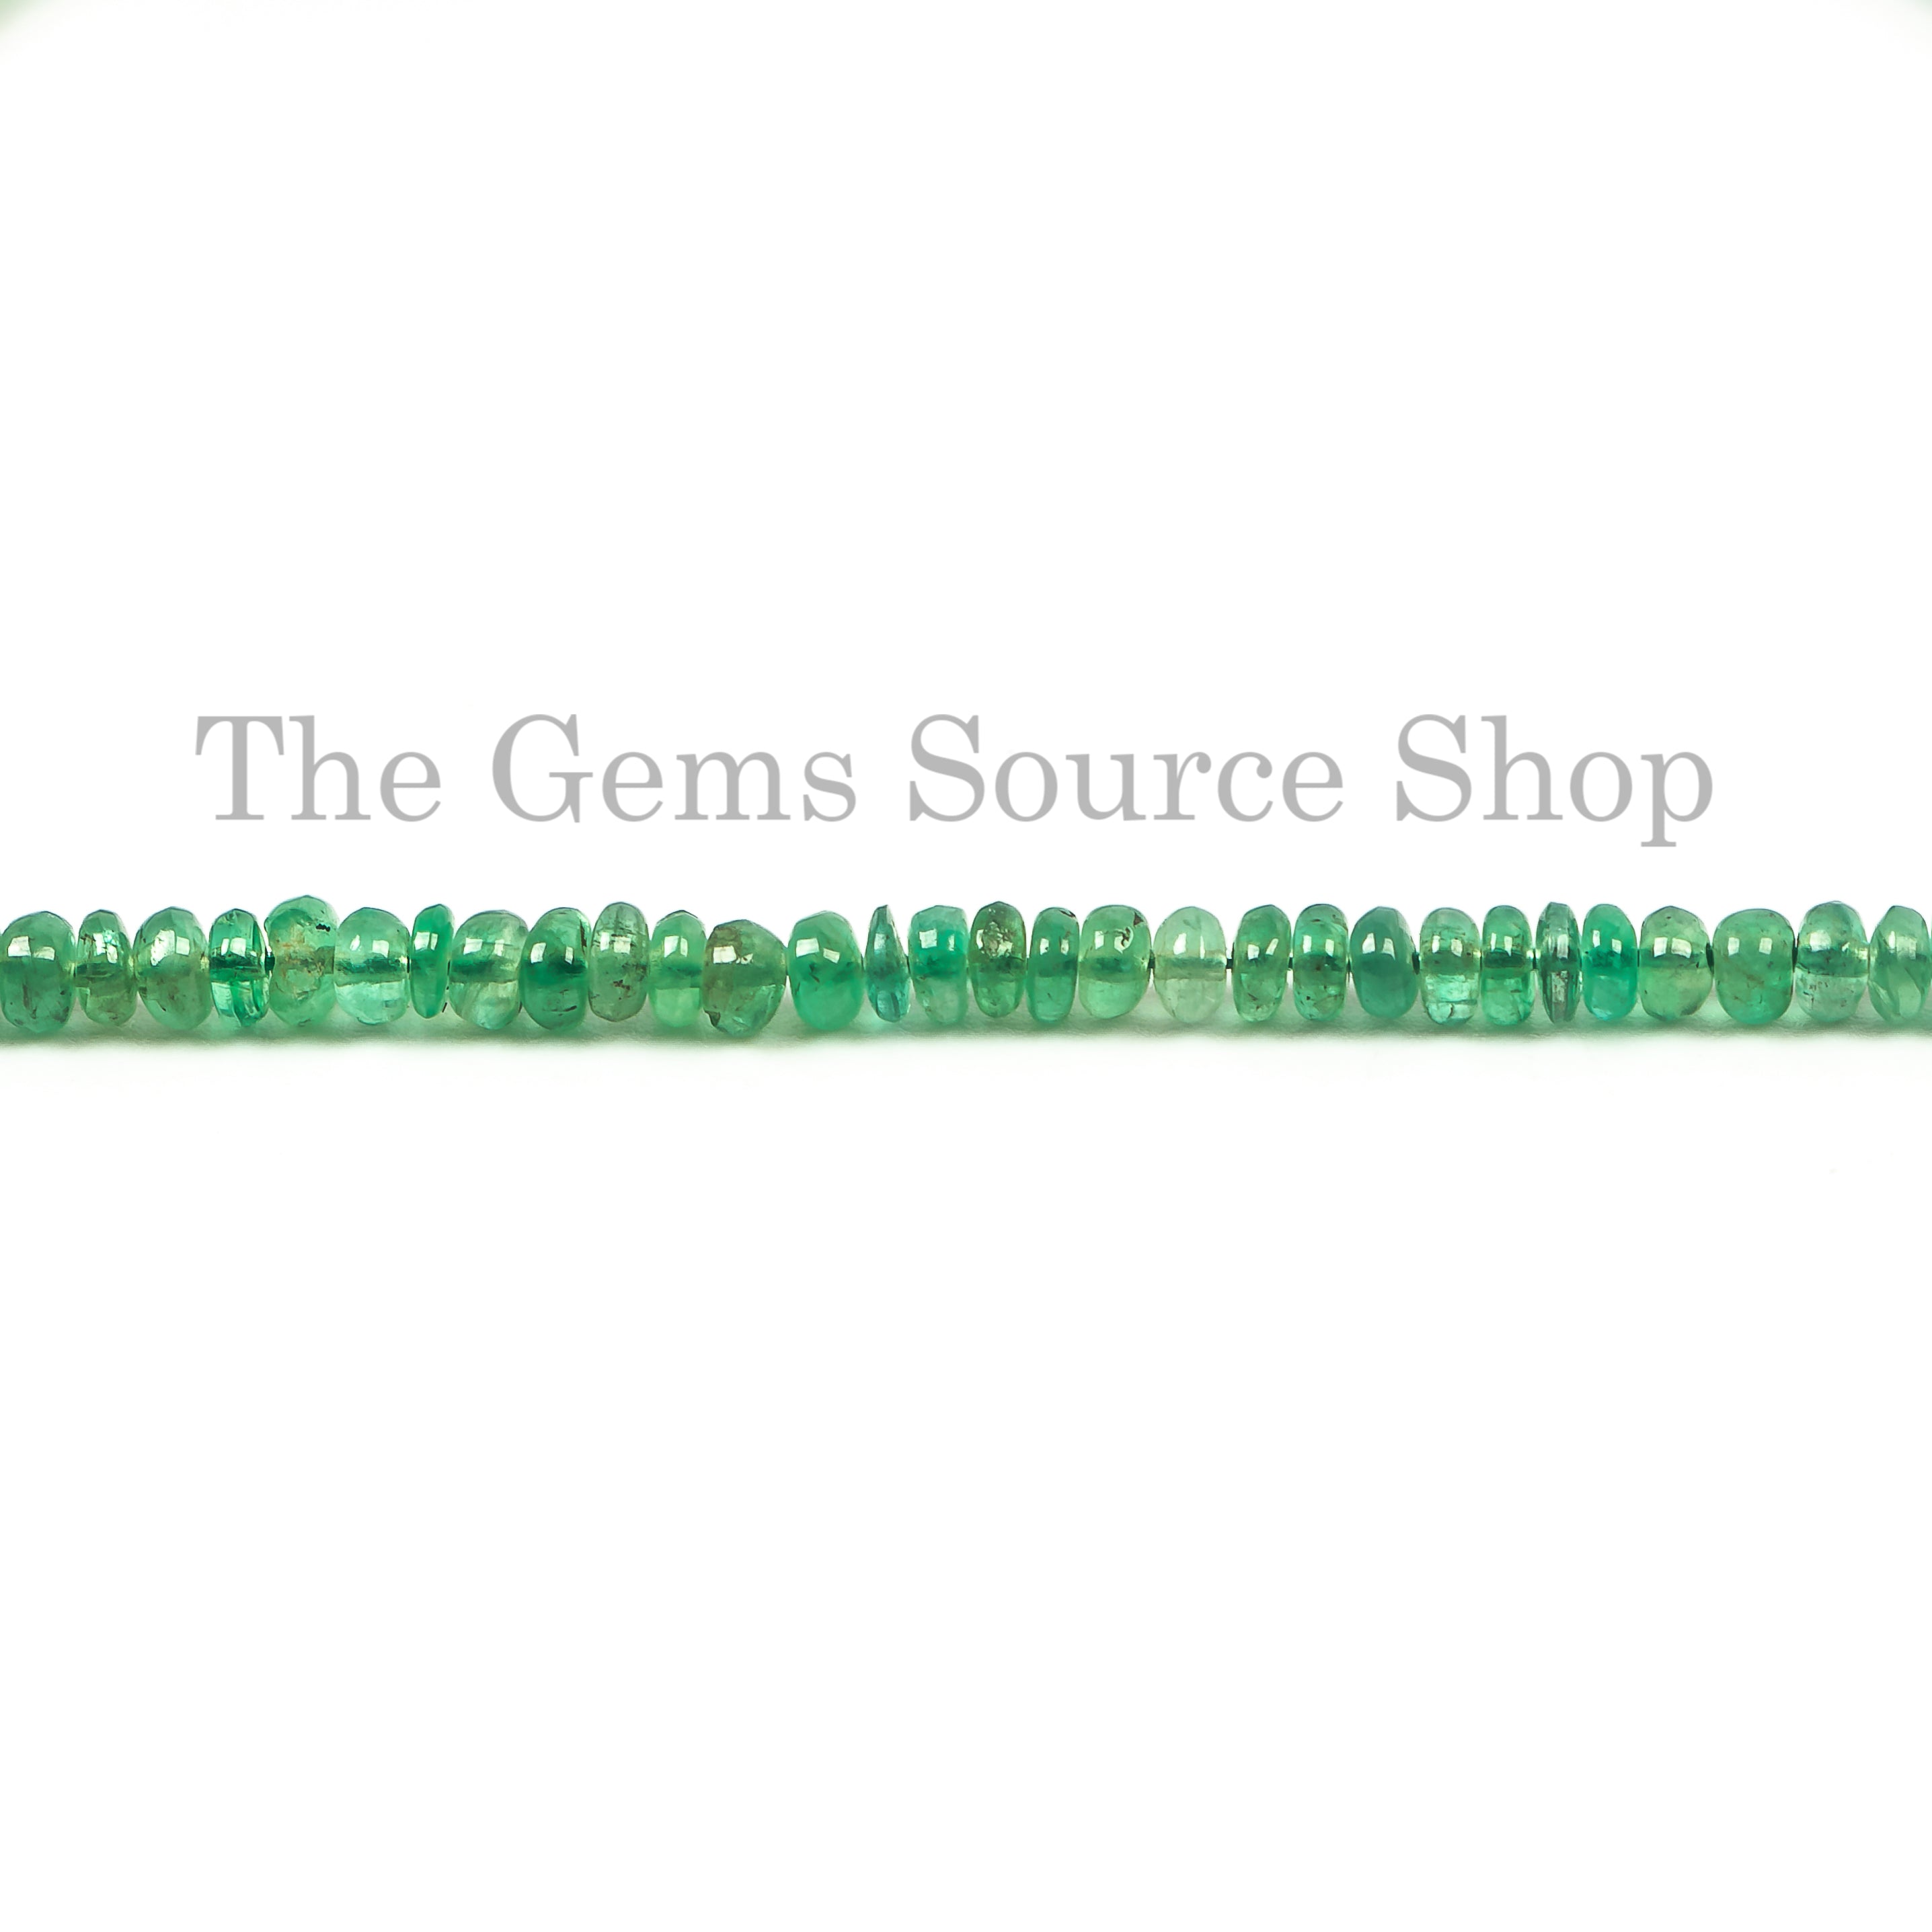 Natural Emerald Beads, 2.5-3 mm Emerald Rondelle Shape, Emerald Smooth Beads, Emerald Gemstone Beads, Emerald Plain Jewelry Making Beads